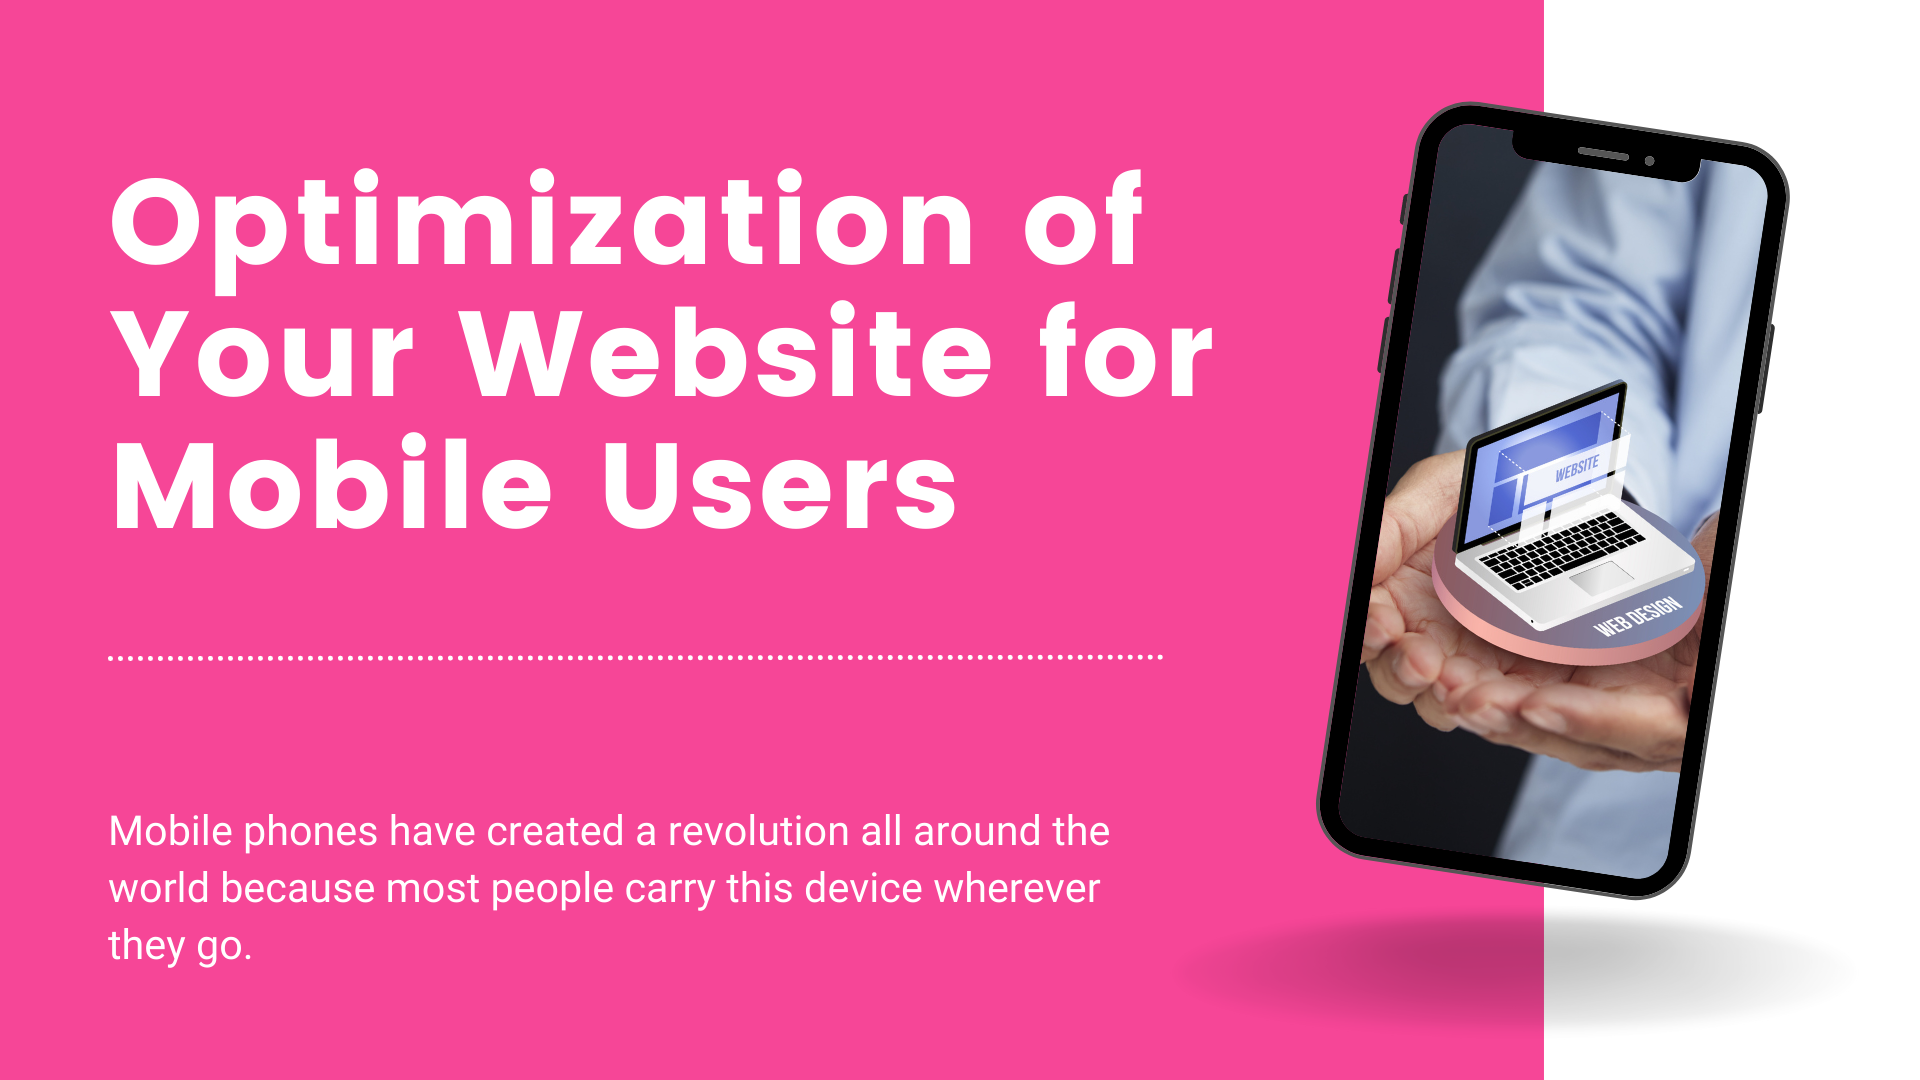 Optimization of Your Website for Mobile Users